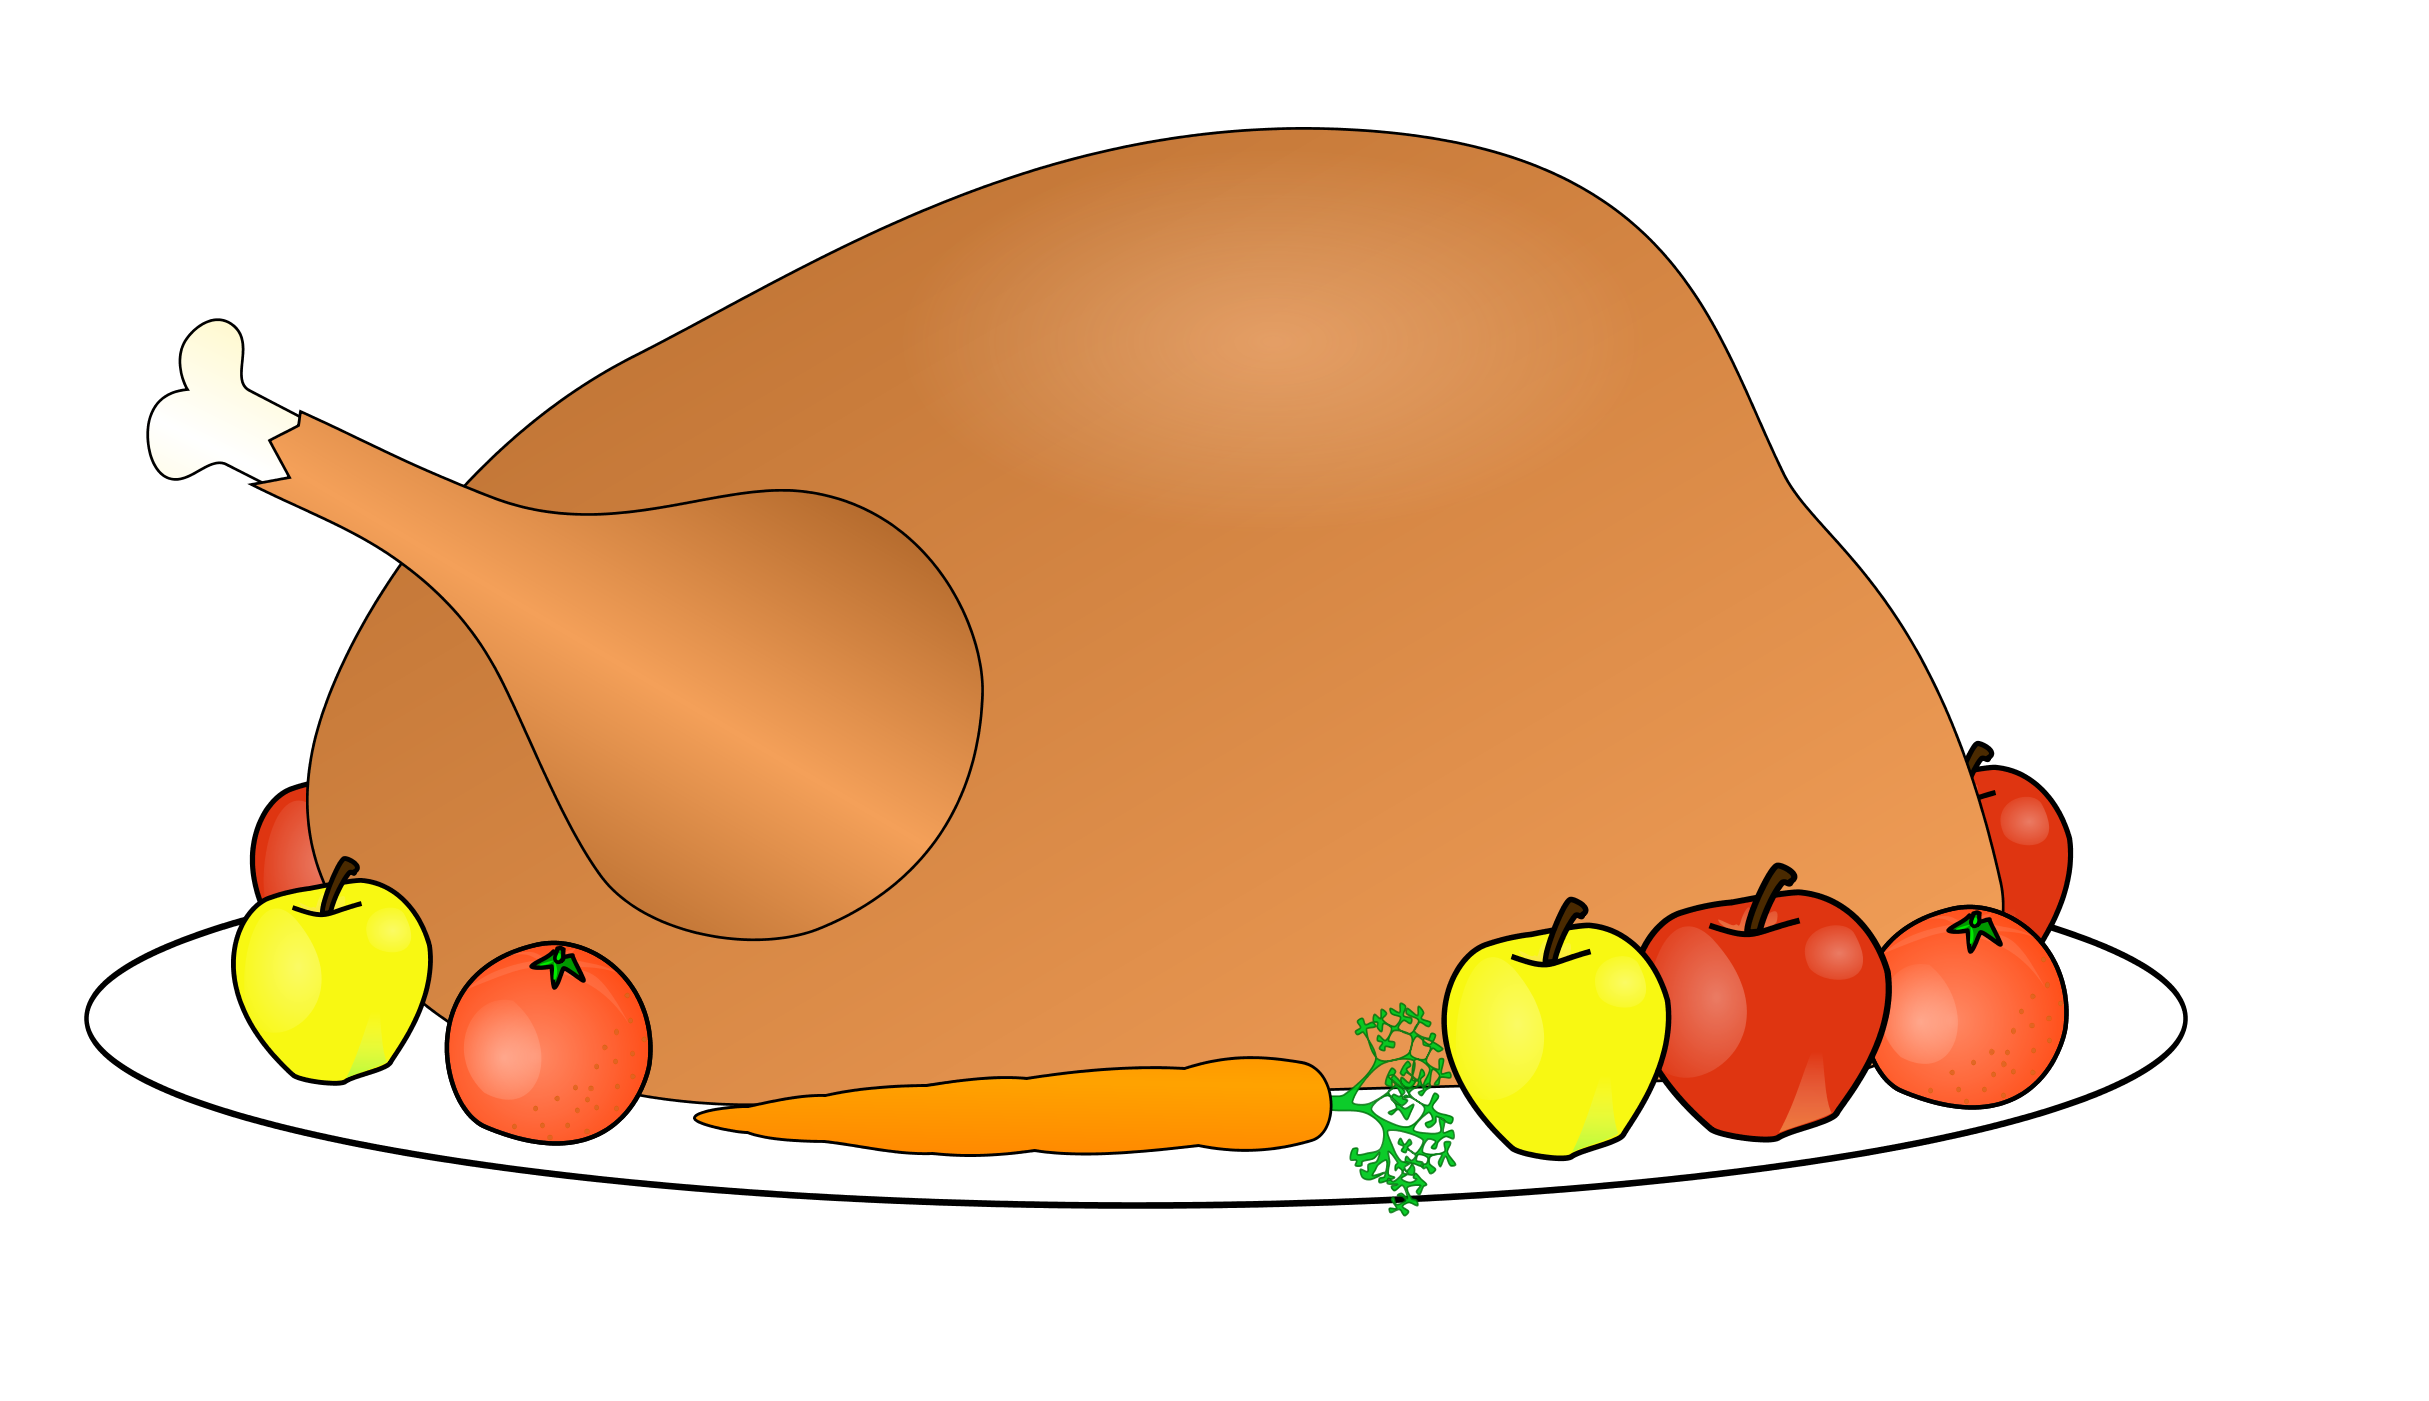 Thanksgiving Clip Art and Hot Pictures | Download Free Word, Excel ...